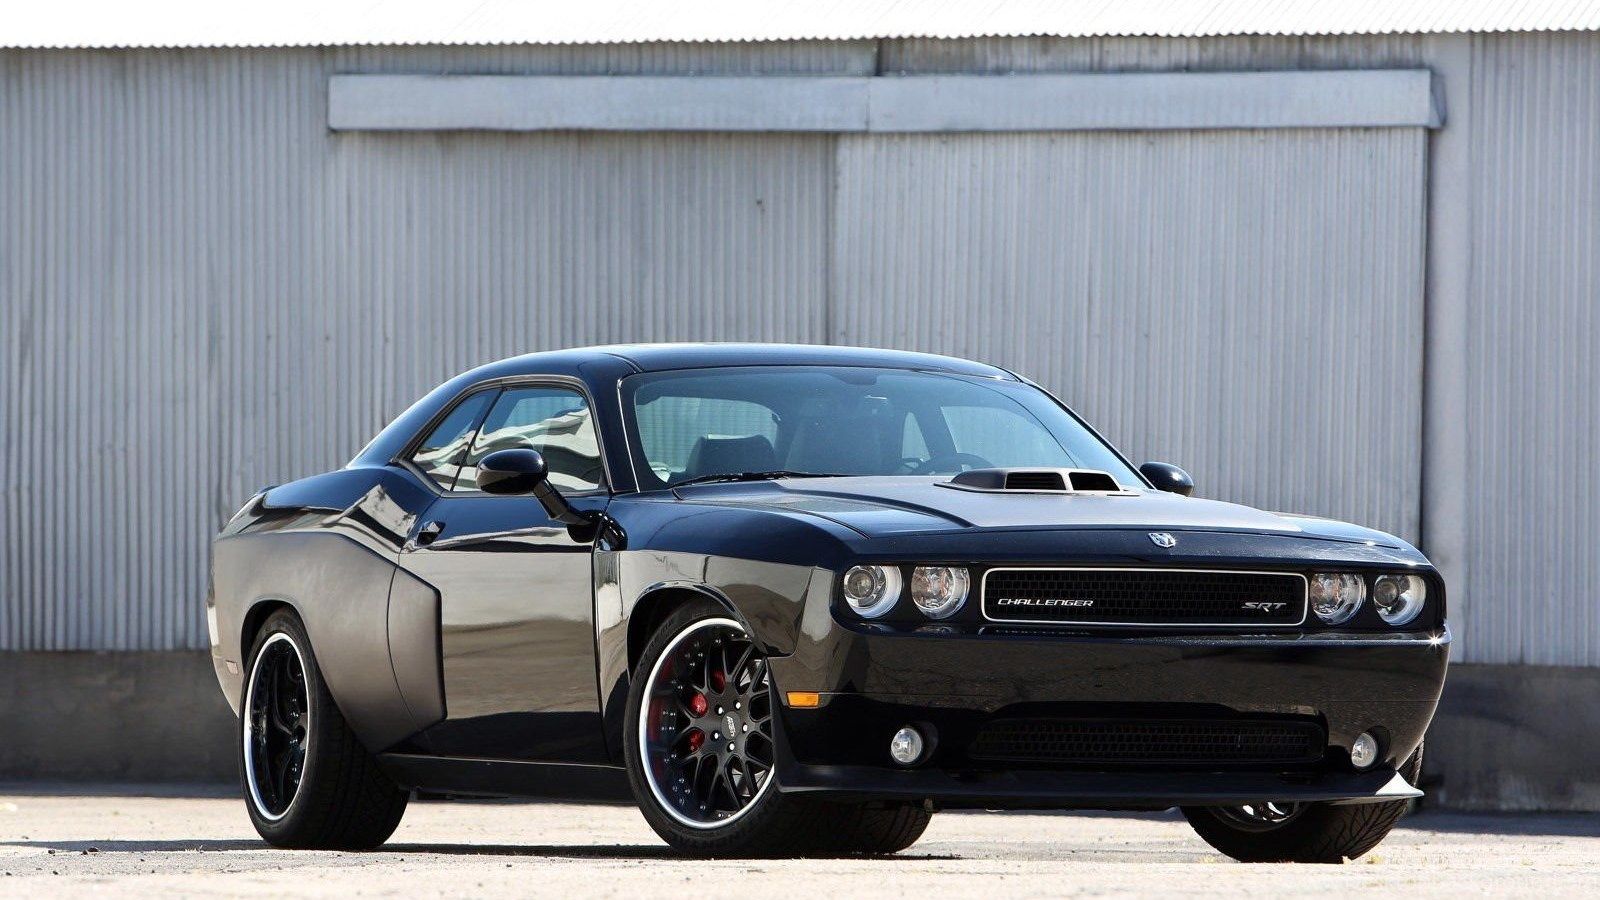 Widebody Challenger SRT8 392 Fast & Furious 6 Movie Cars